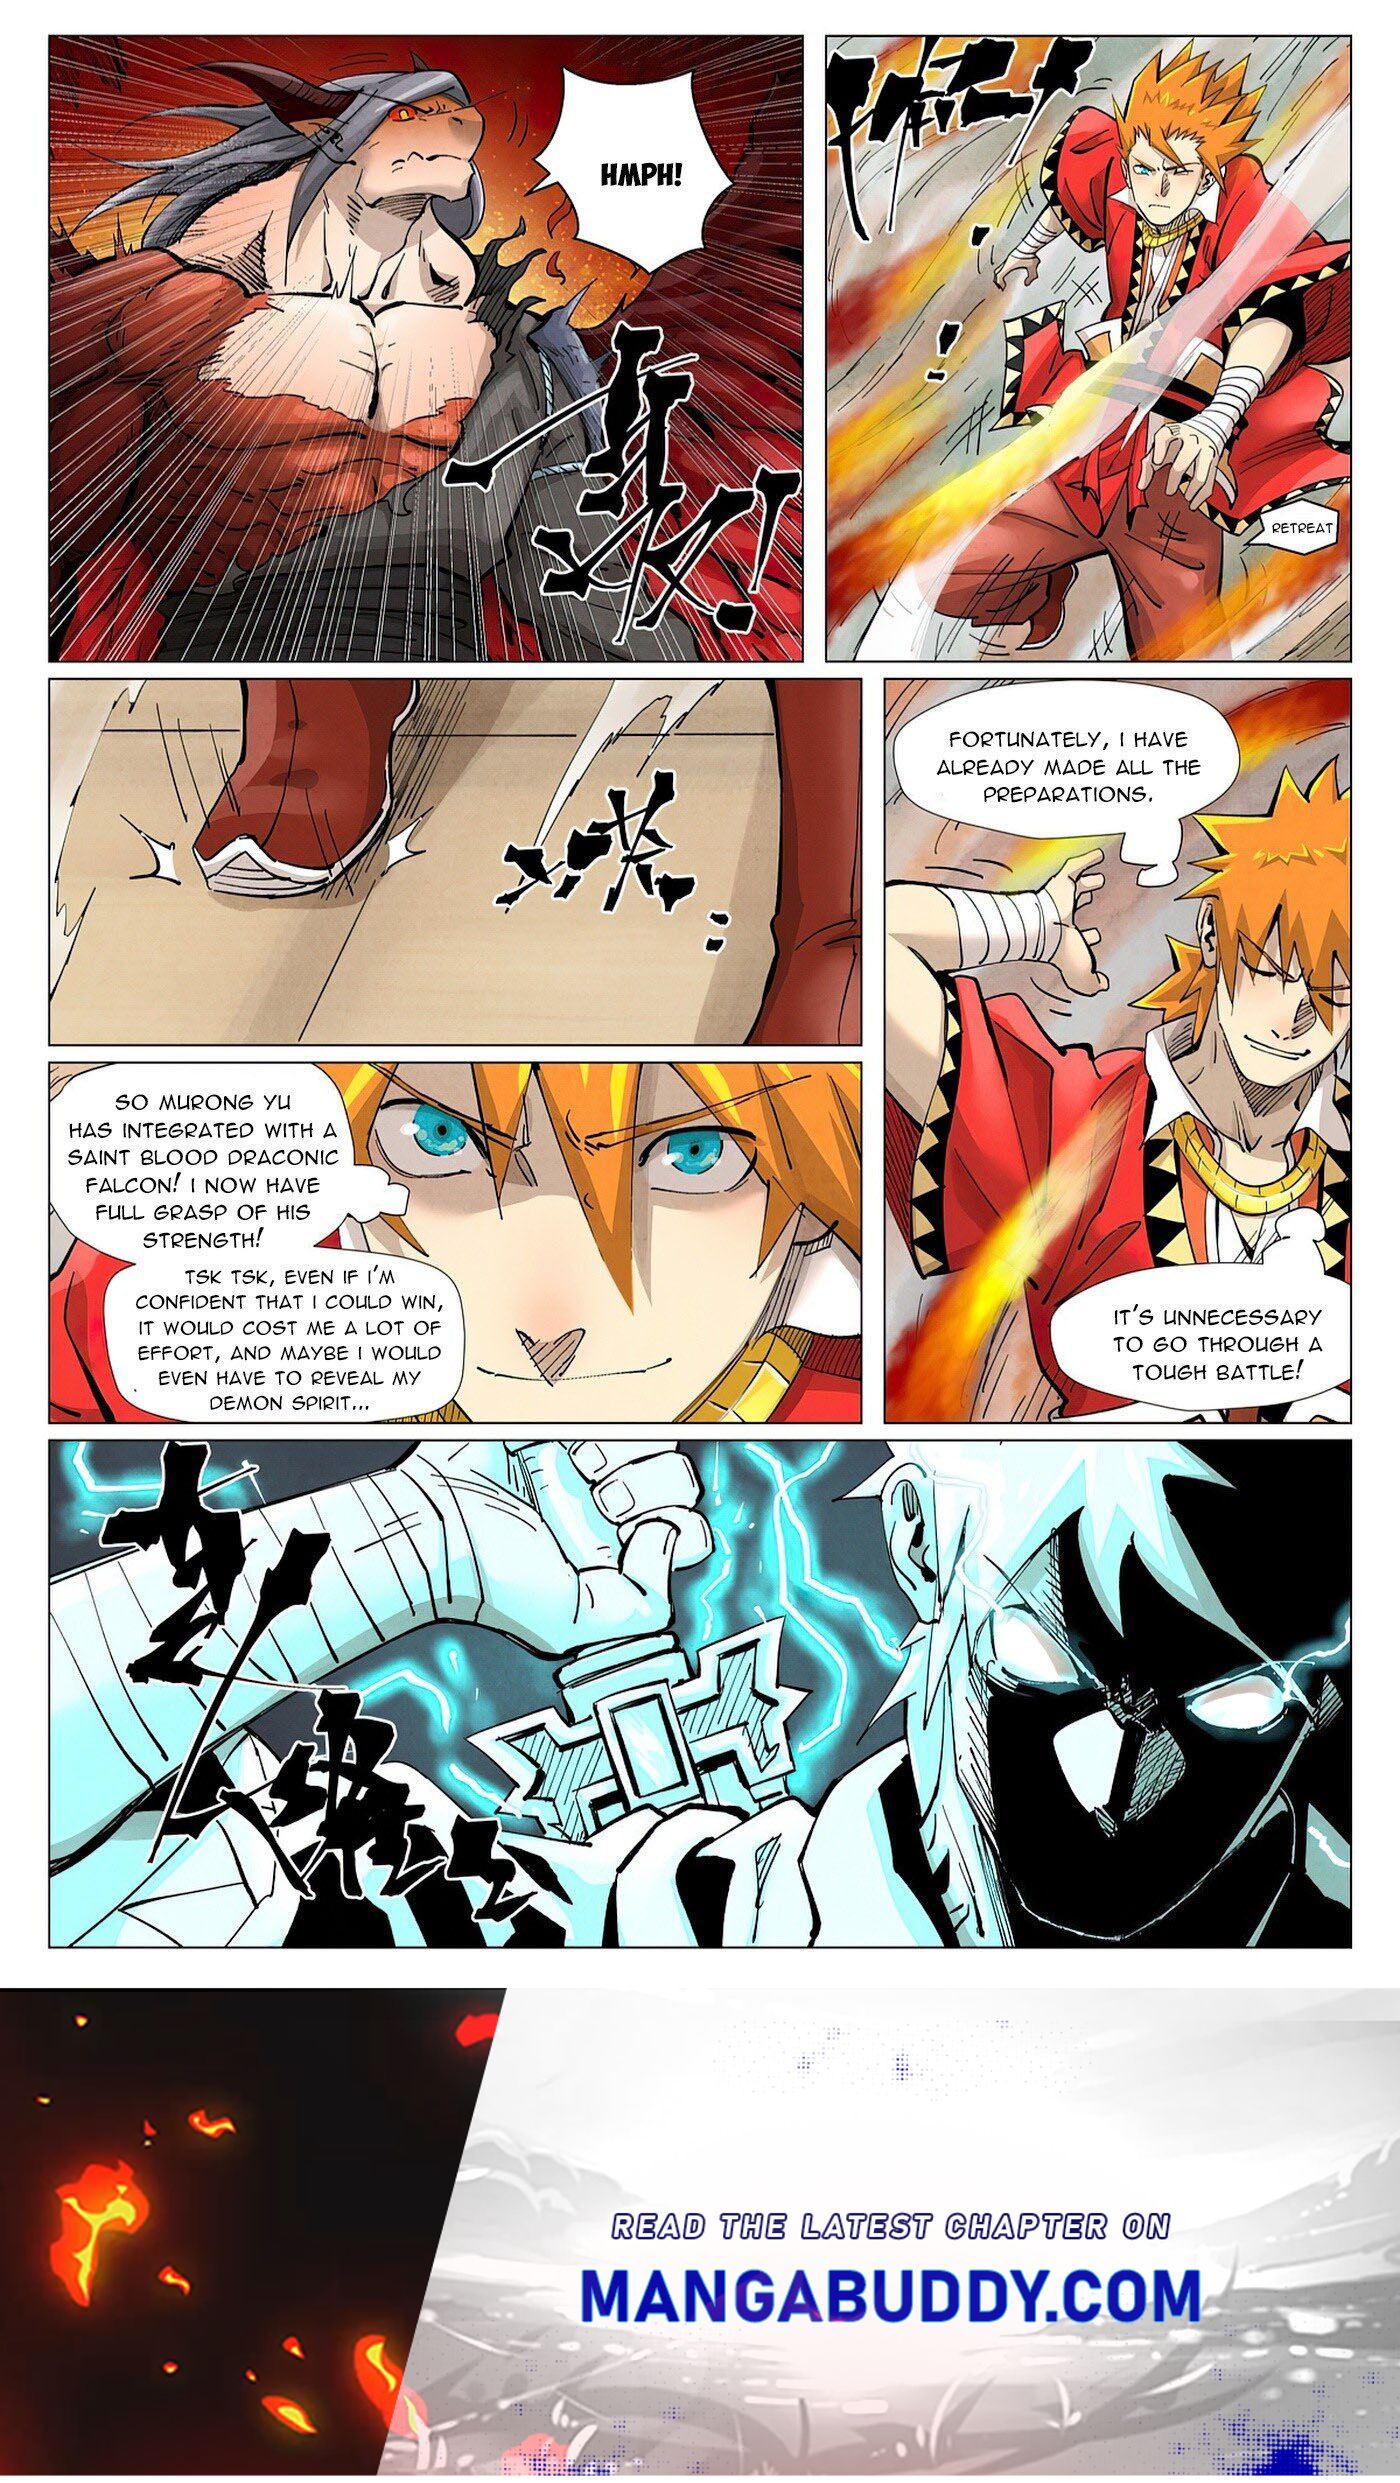 Tales Of Demons And Gods Chapter 369.5